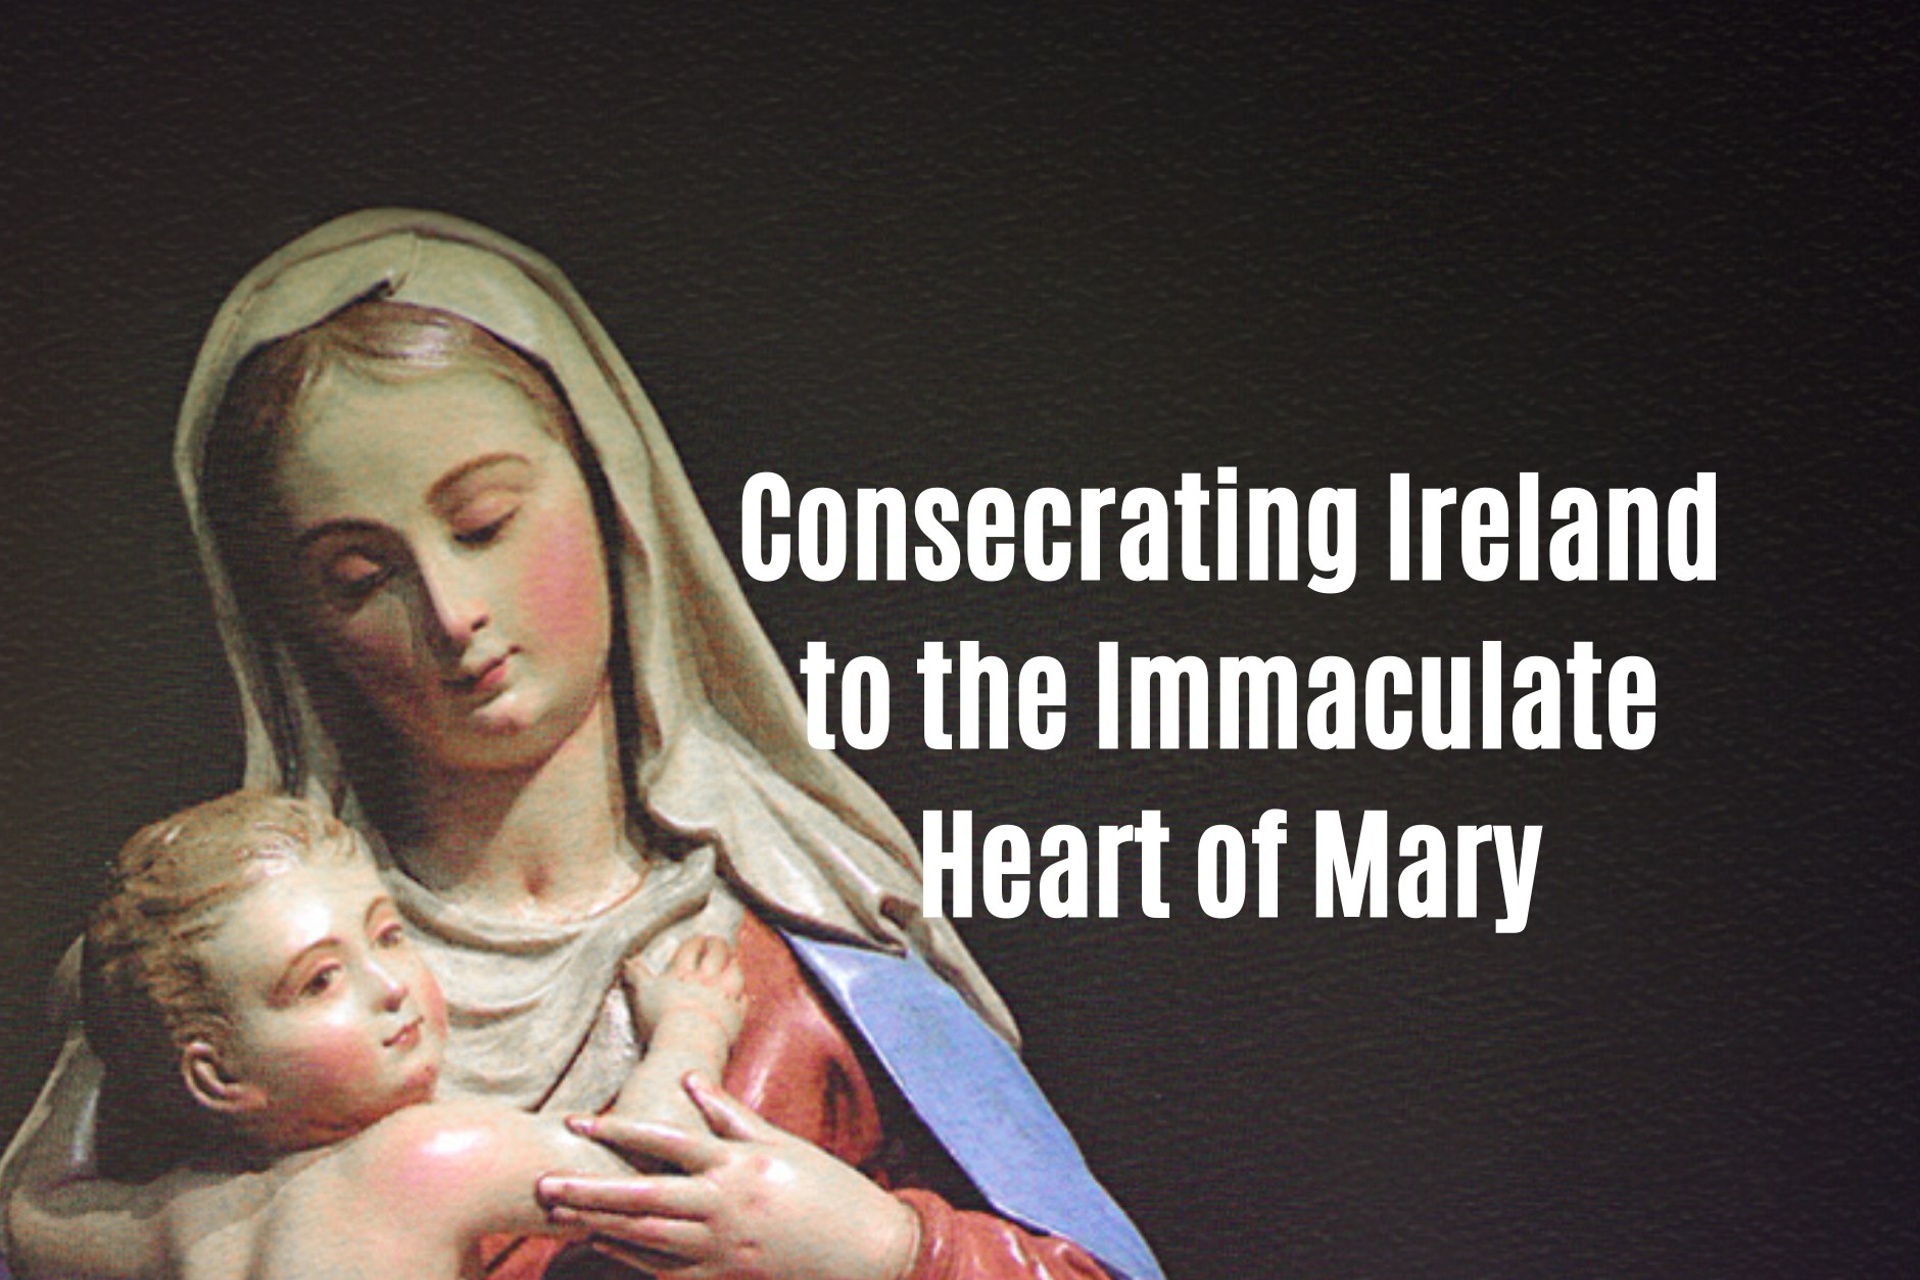 Consecrating Ireland to the Immaculate Heart of Mary